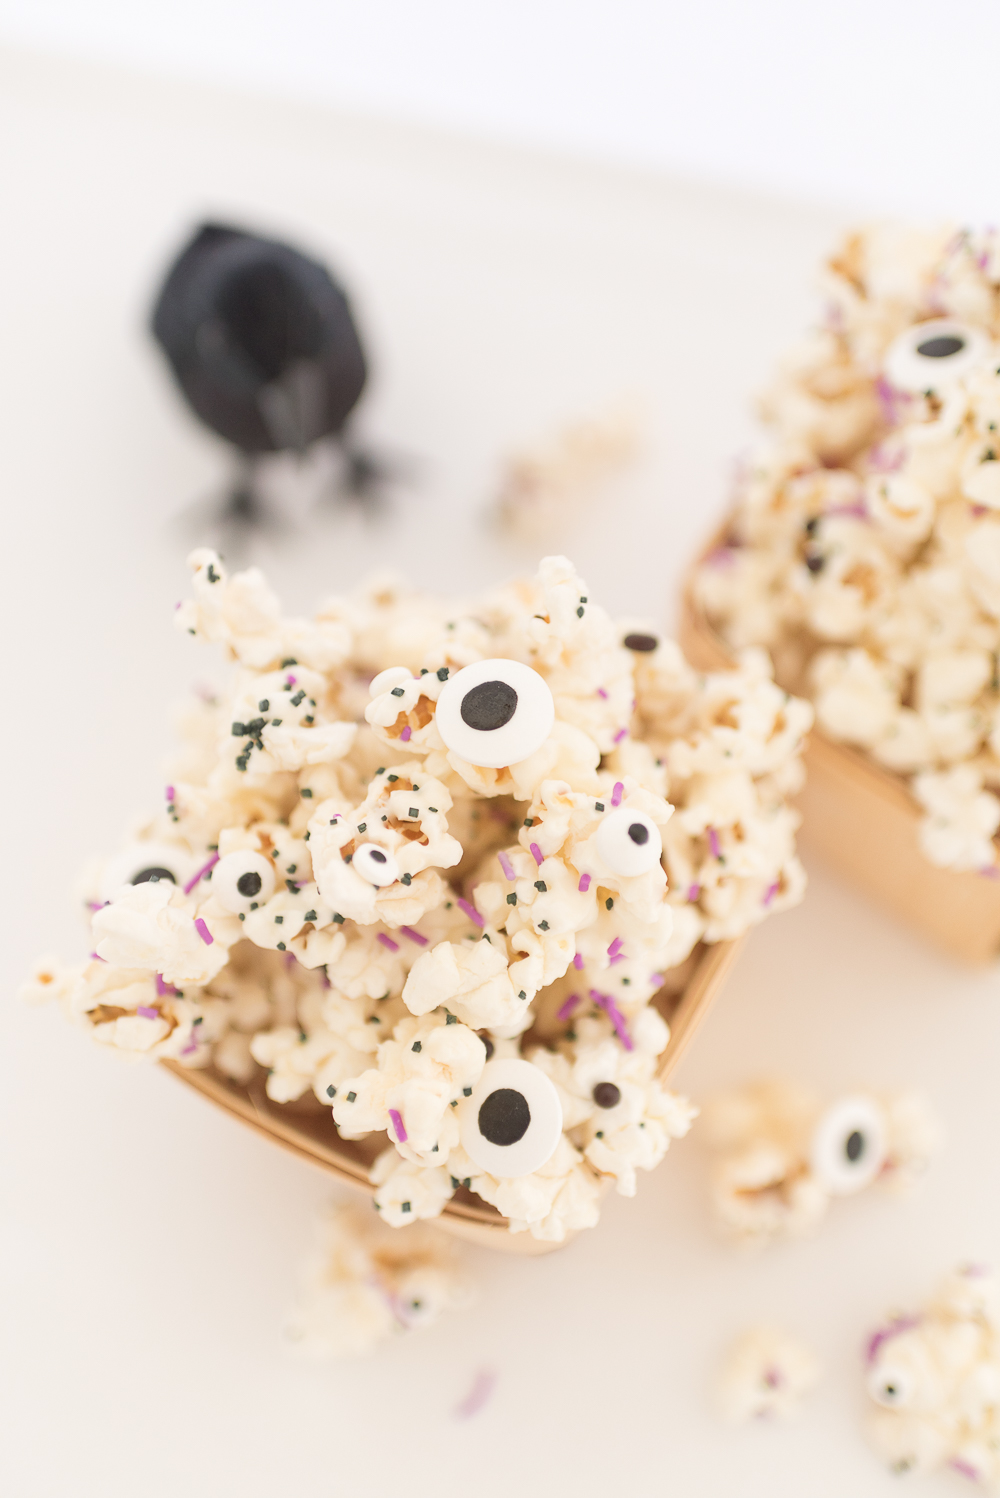 Halloween Monster popcorn drizzled in melted white chocolate and mixed with sprinkles and candy eyeballs